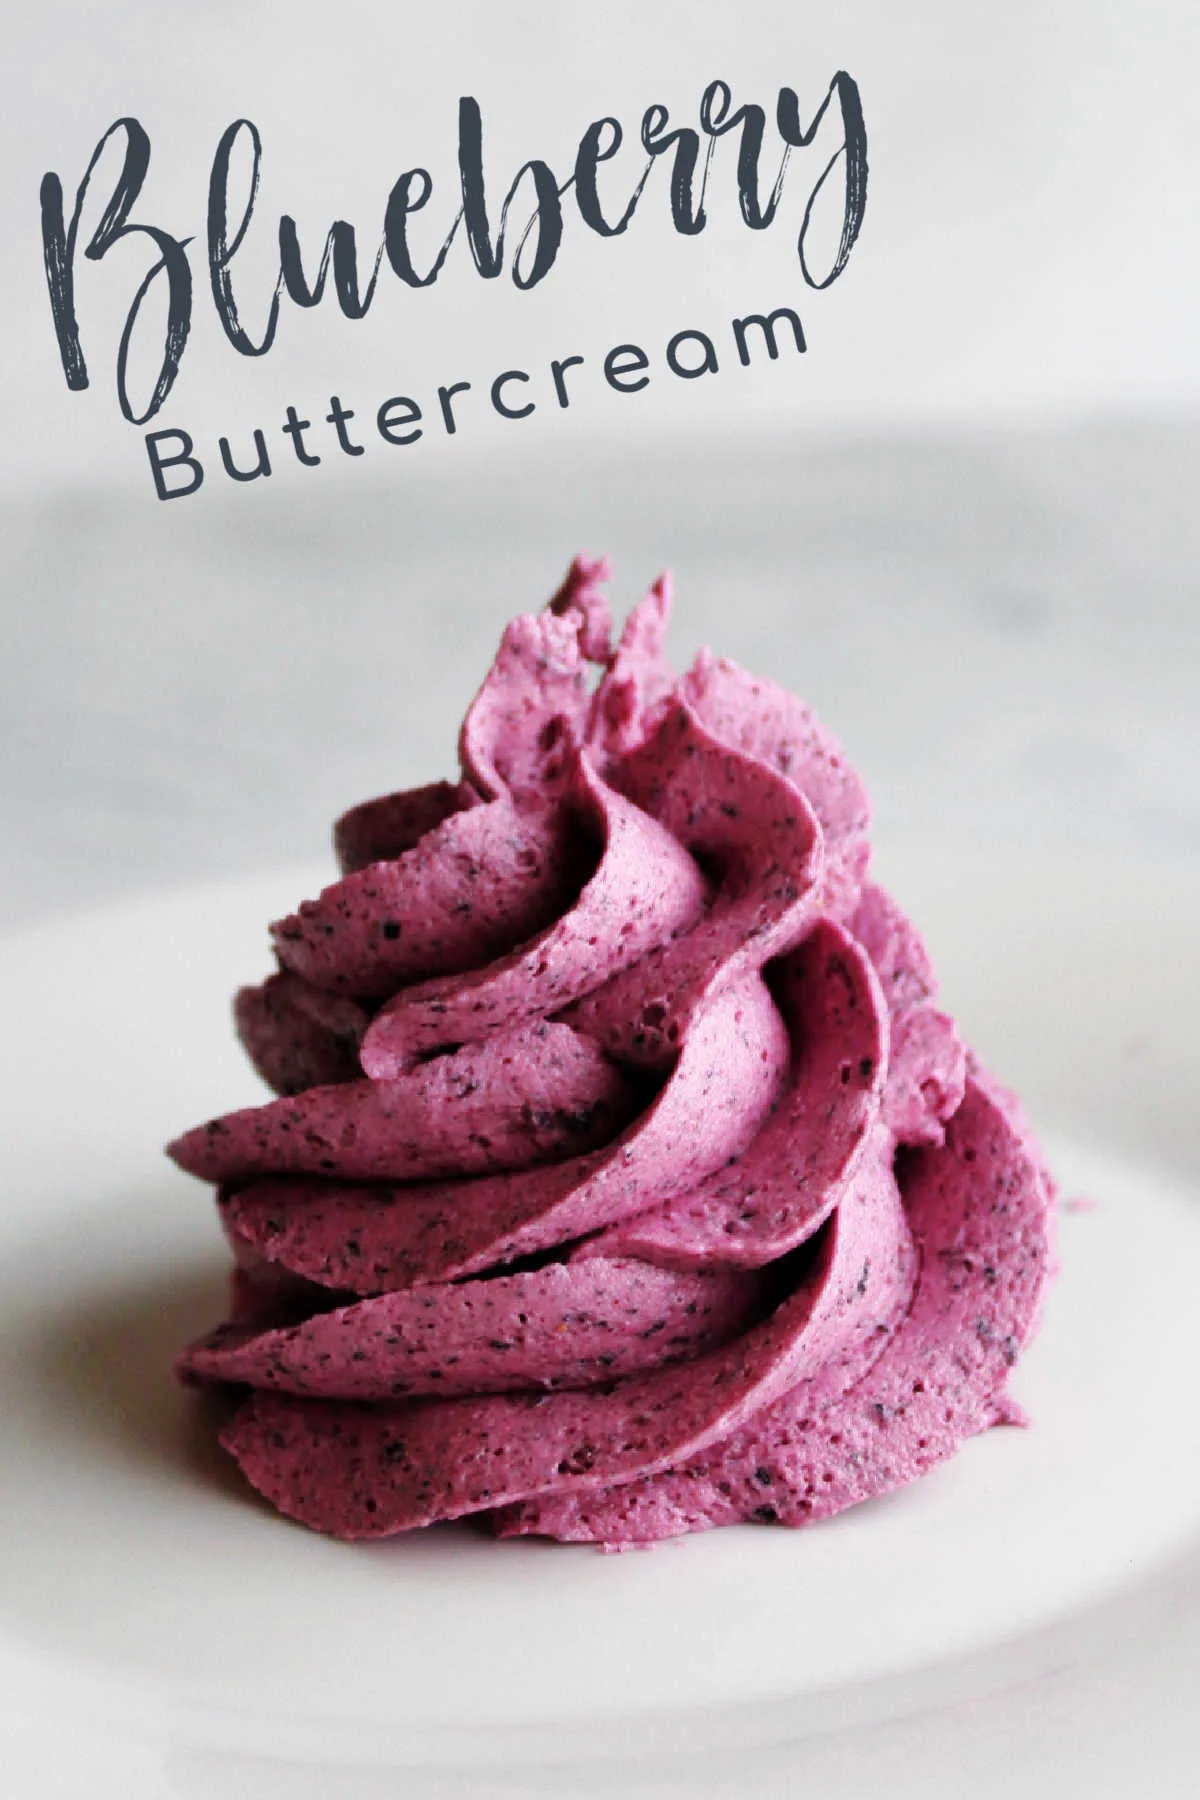 Bright blueberry buttercream is both colorful and flavorful. It is perfect for topping cakes, cupcakes, cookies and more!